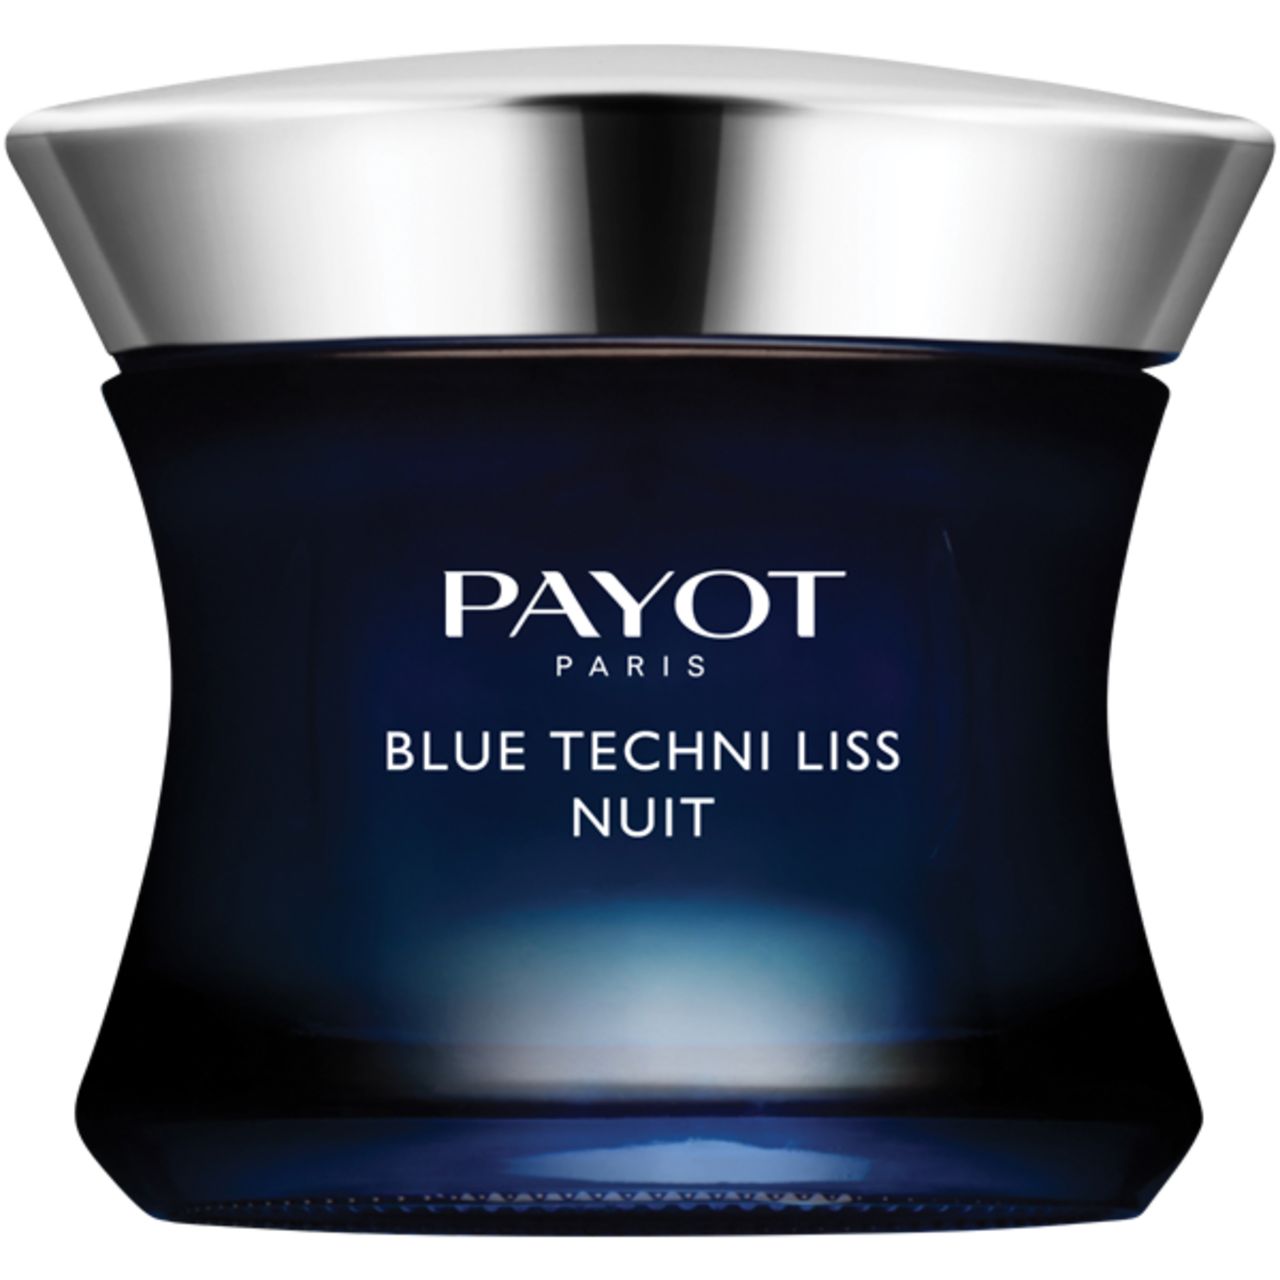 Payot, Blue Techni Liss Nuit